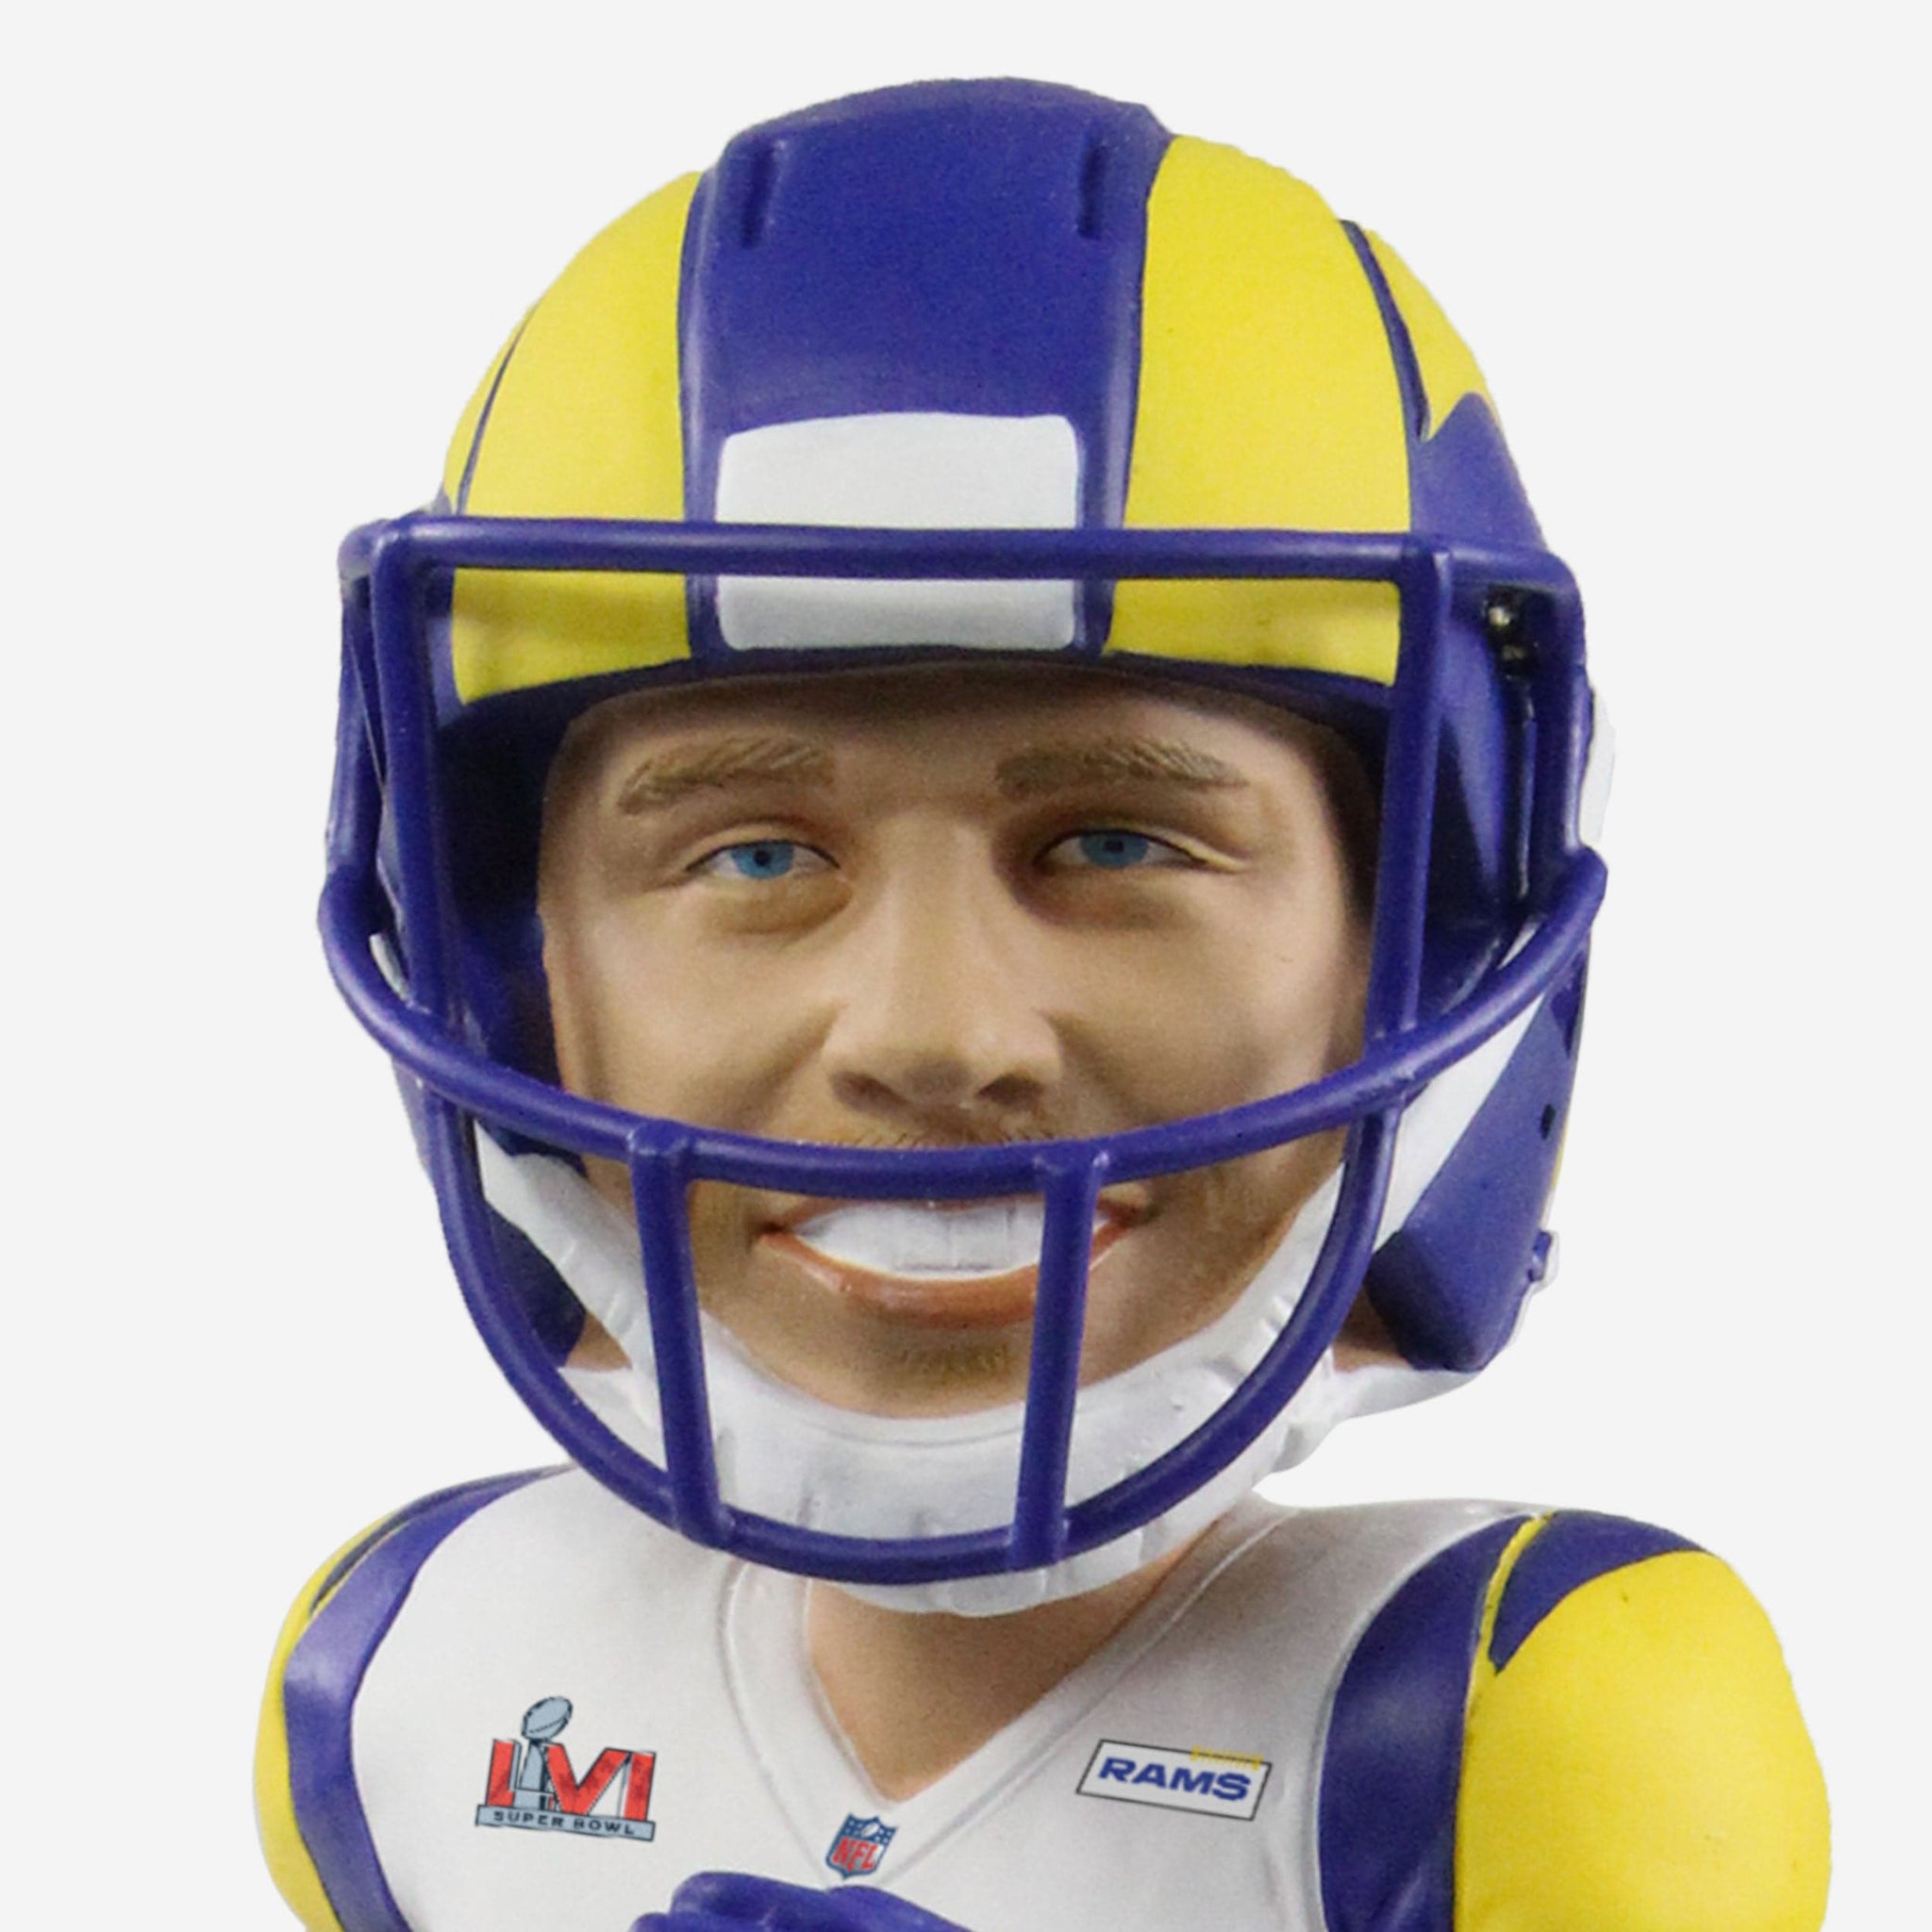 Cooper Kupp Los Angeles Rams Super Bowl LVI Champions Bobblehead Officially Licensed by NFL